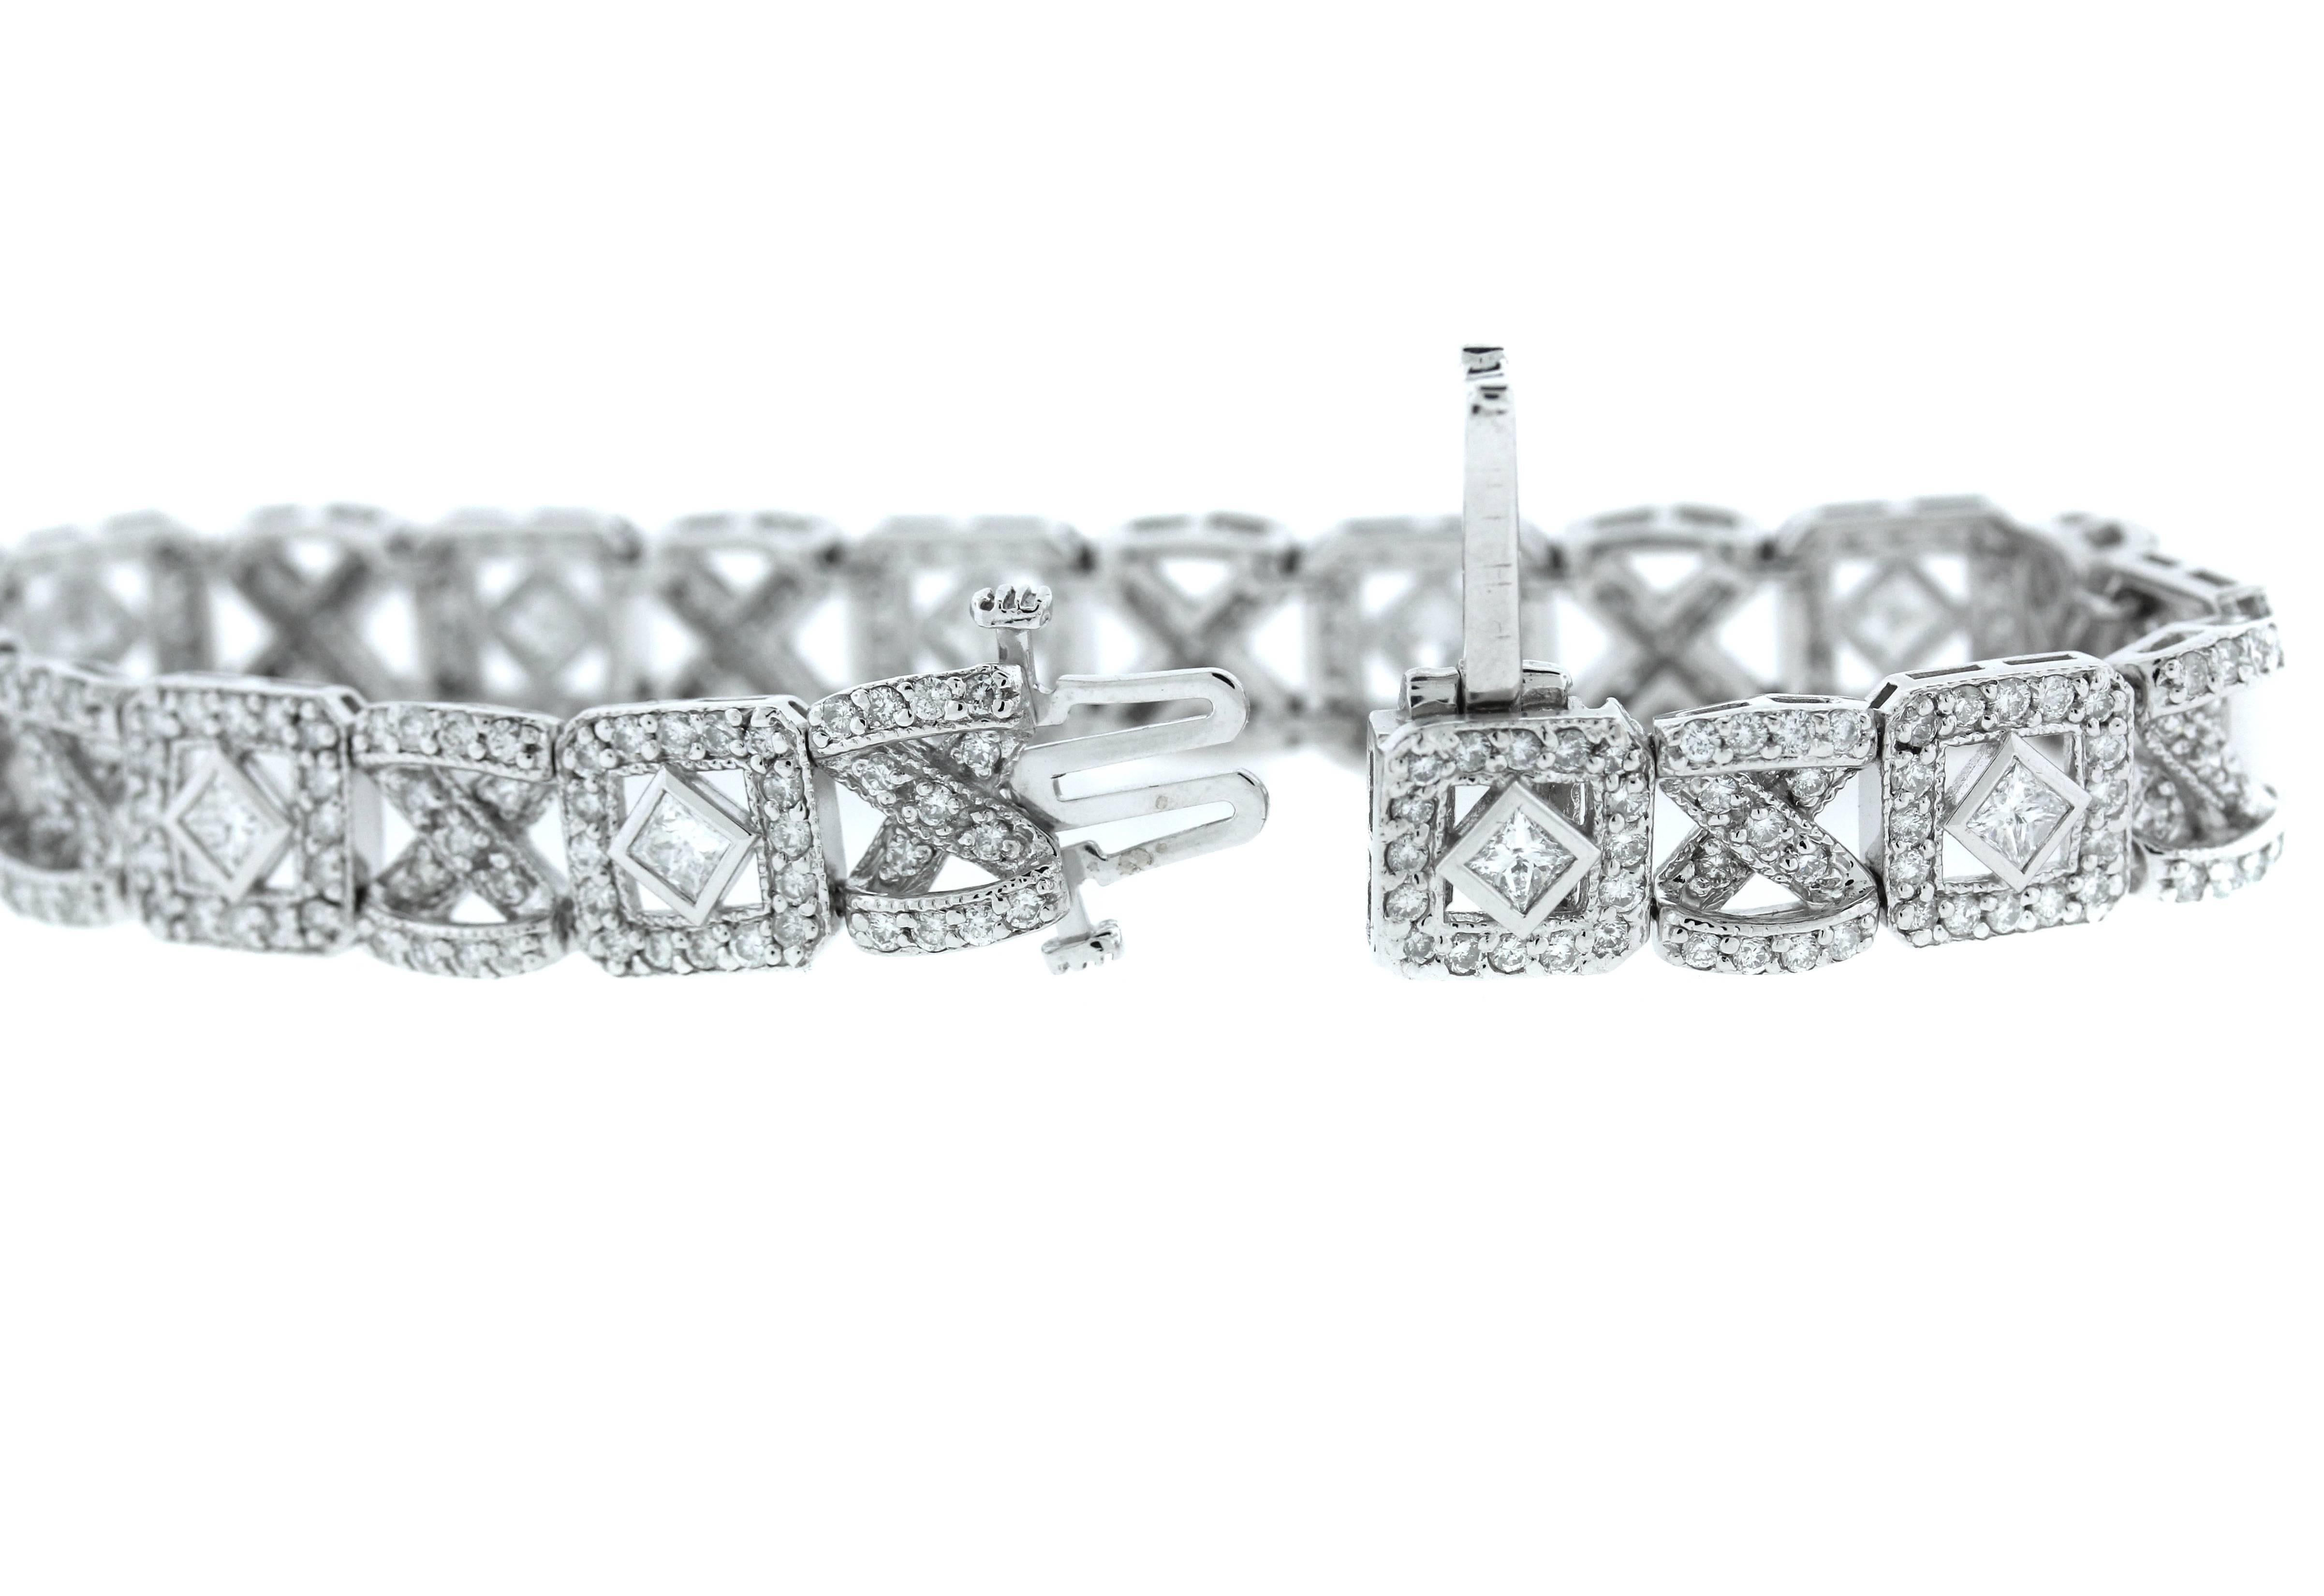 14K White Gold Bracelet with Round and Princess Cut Diamonds

5.66ct. Diamonds total weight

Bracelet is 7 inches in length and 0.4 inch wide

Push button clasp with safety used to open and close.

21.7 grams

Estate